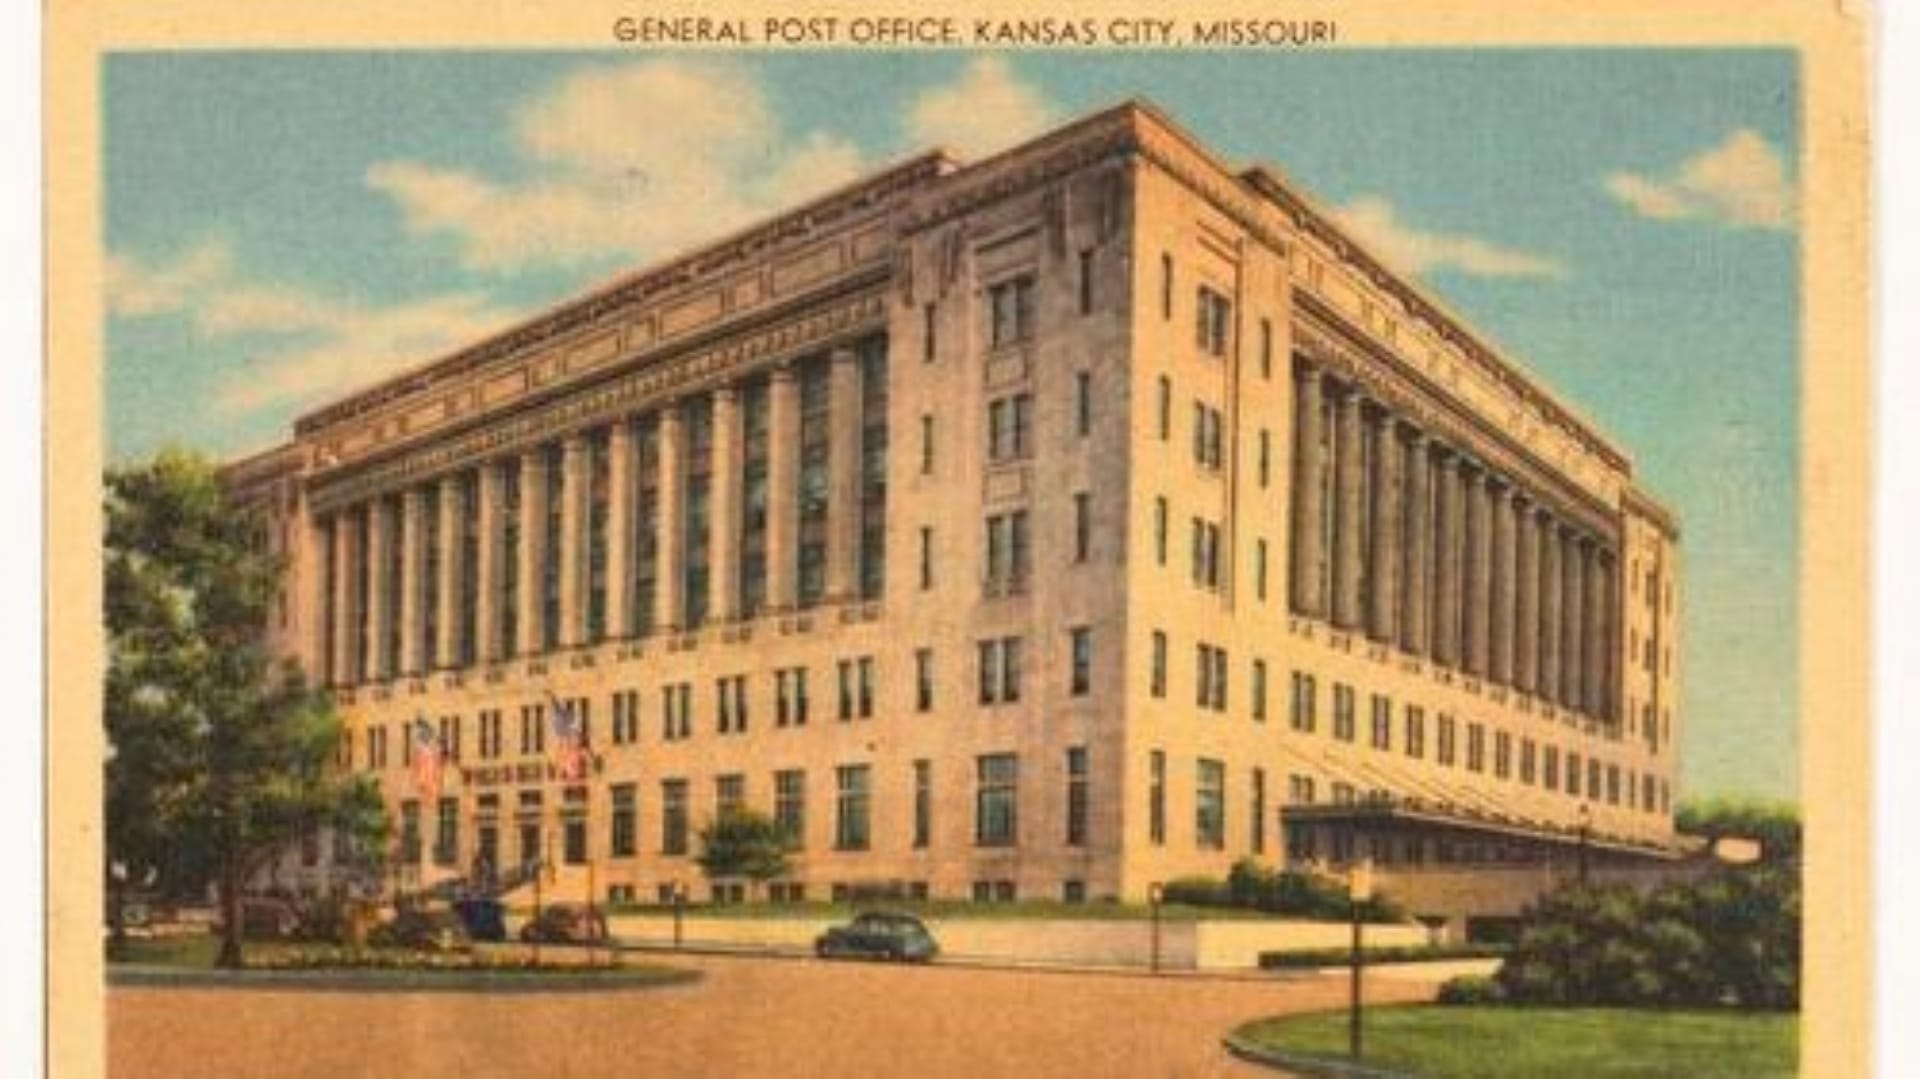 More Than Mail: A Brief History of Kansas City Post Offices